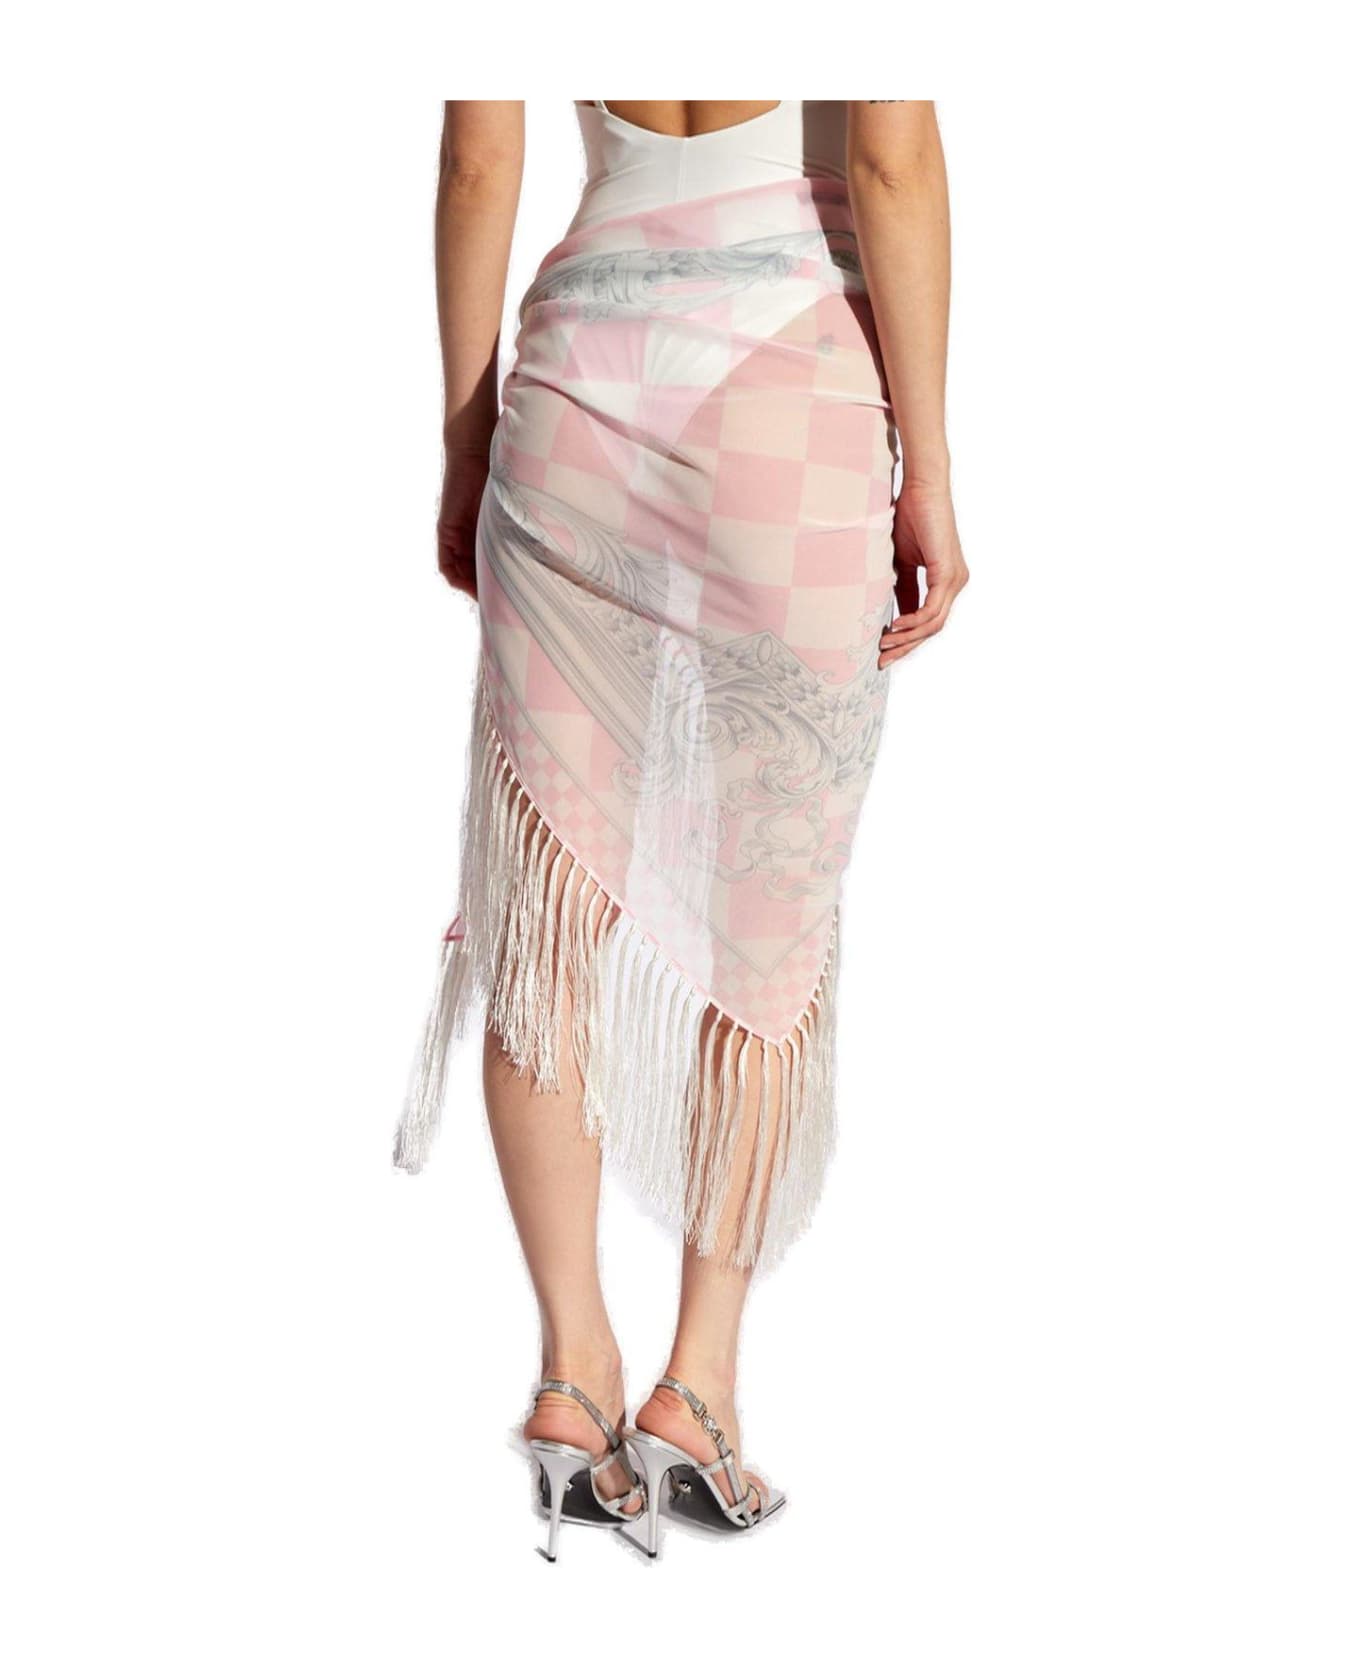 Versace Barocco-printed Fringed Cover-up - Rosa e Bianco